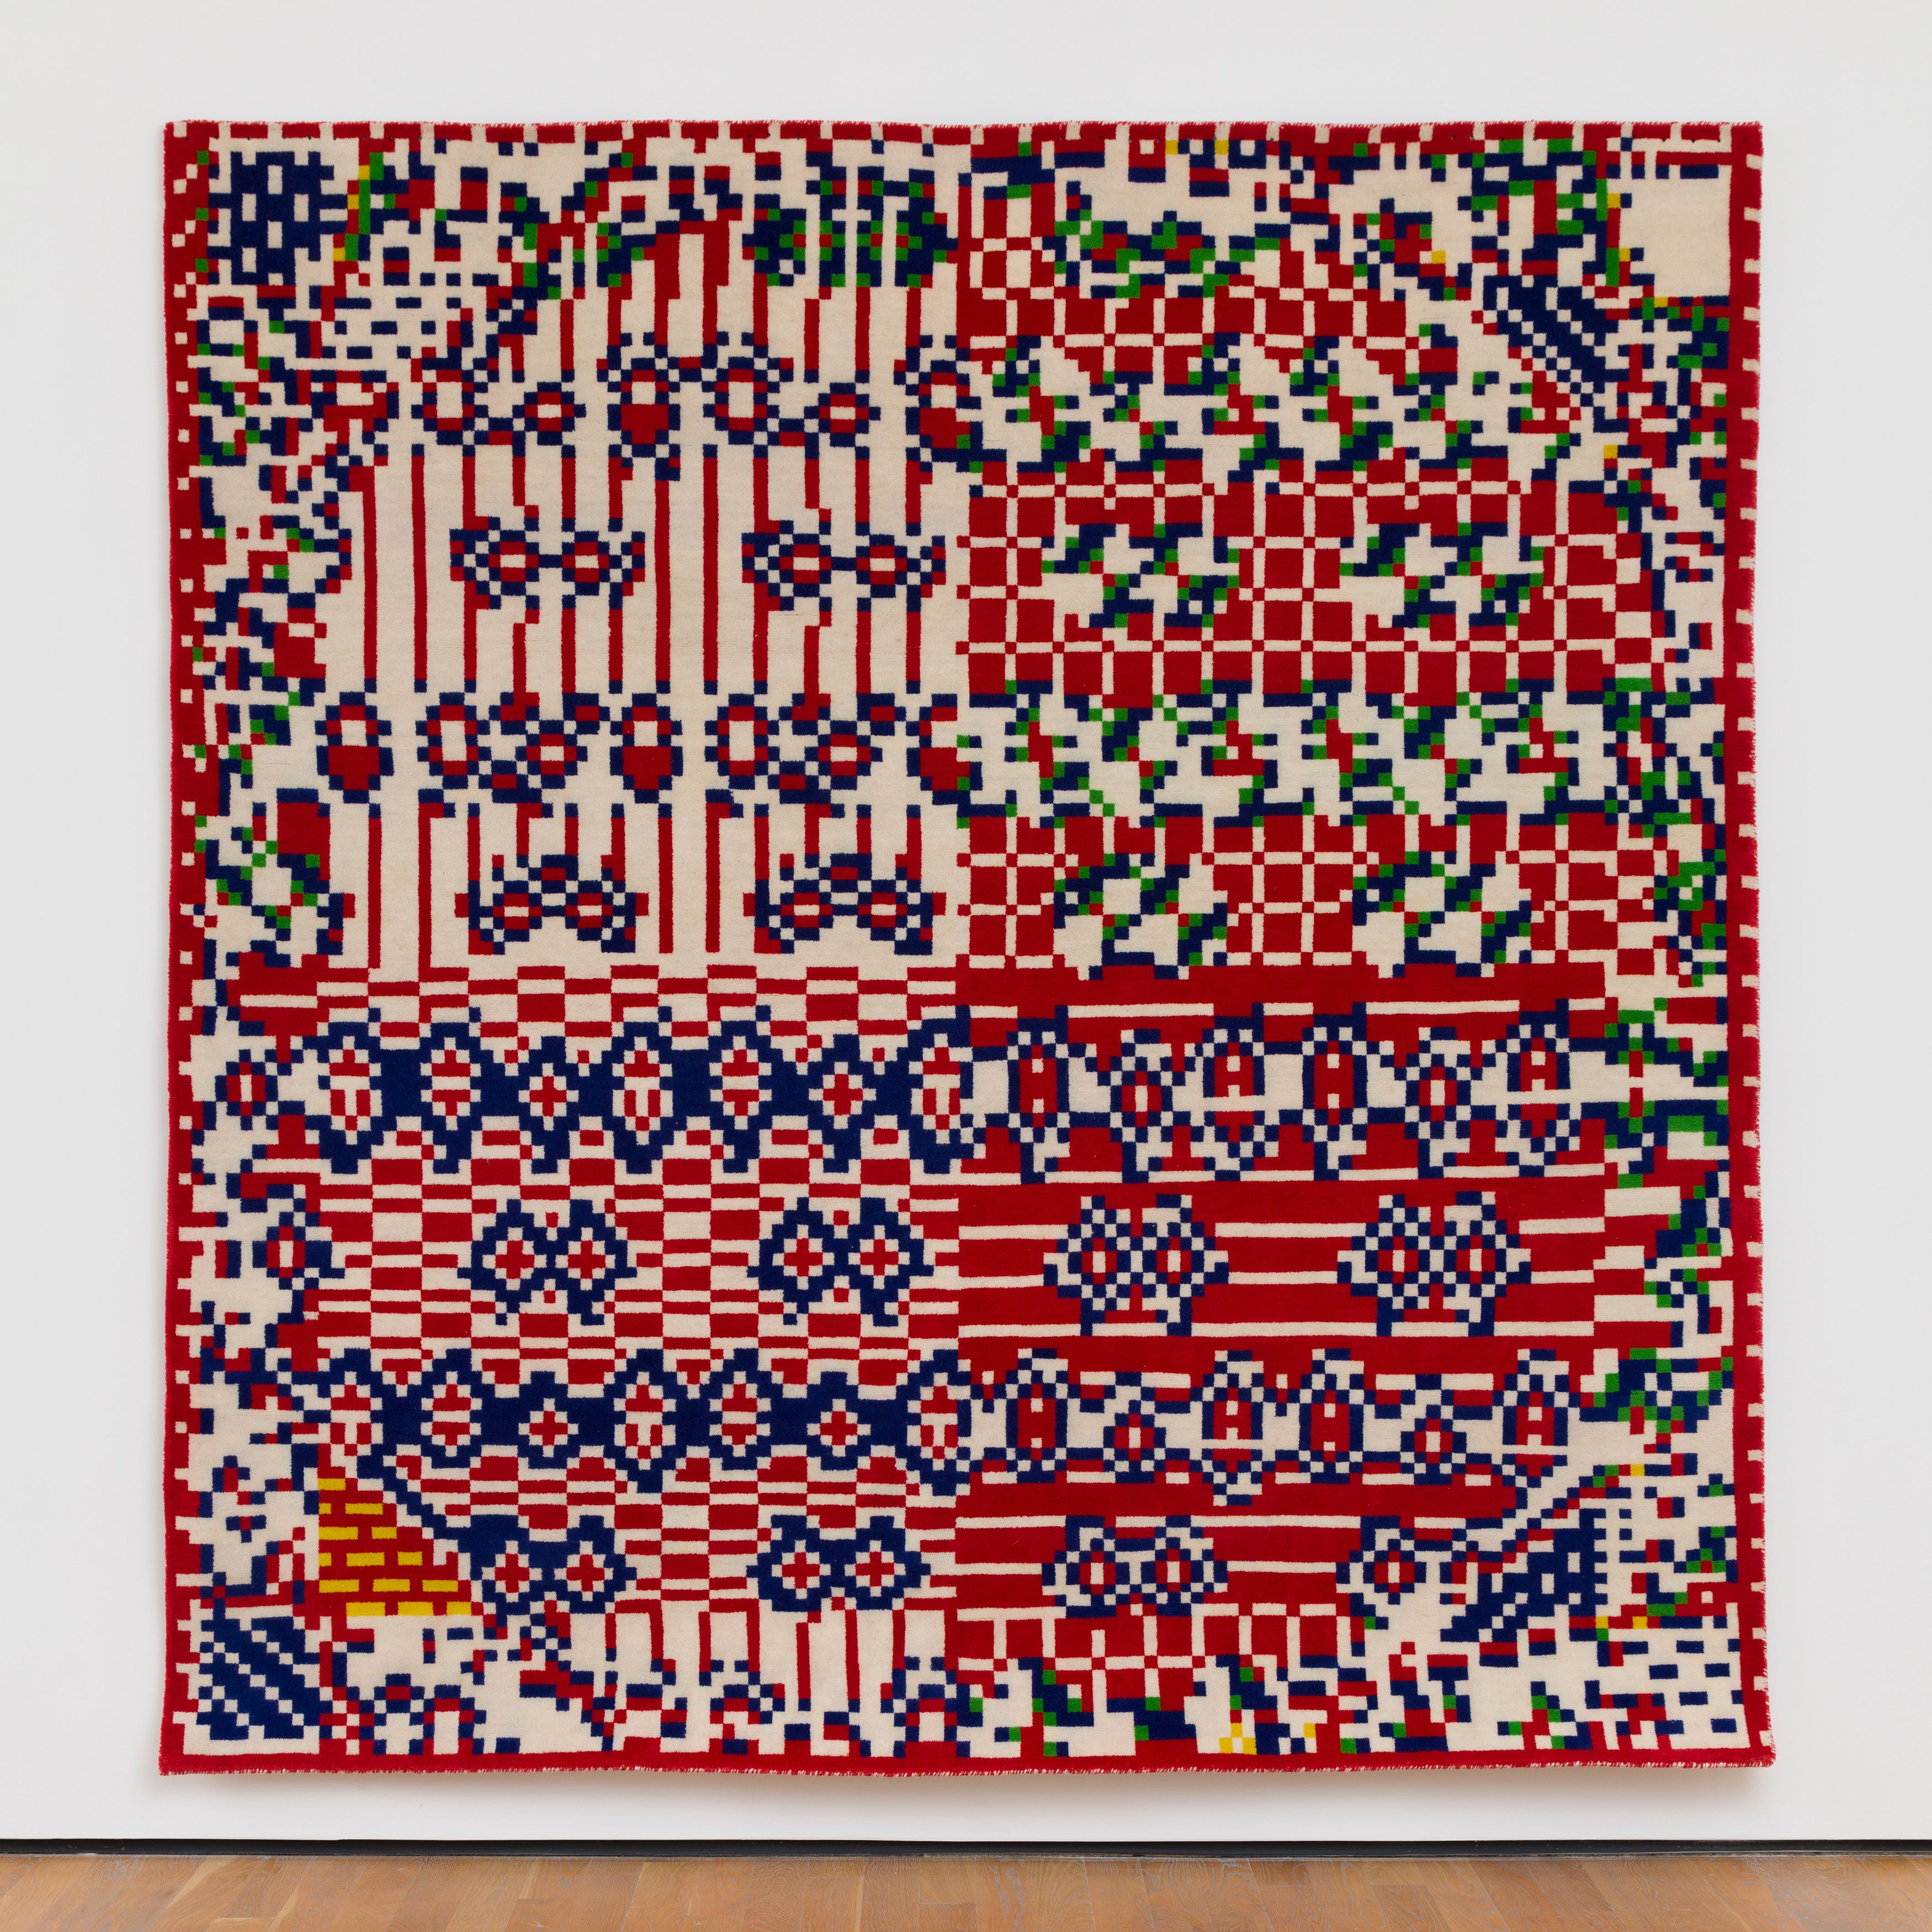 Travess Smalley, Pixel Rug (08_15_21_Pixel_Rug_01), 2022, hand-knotted wool, JavaScript, Photoshop, 96 x 96 in. (243.84 x 243.84 cm). Woven by Ganesh Subhash Ravi